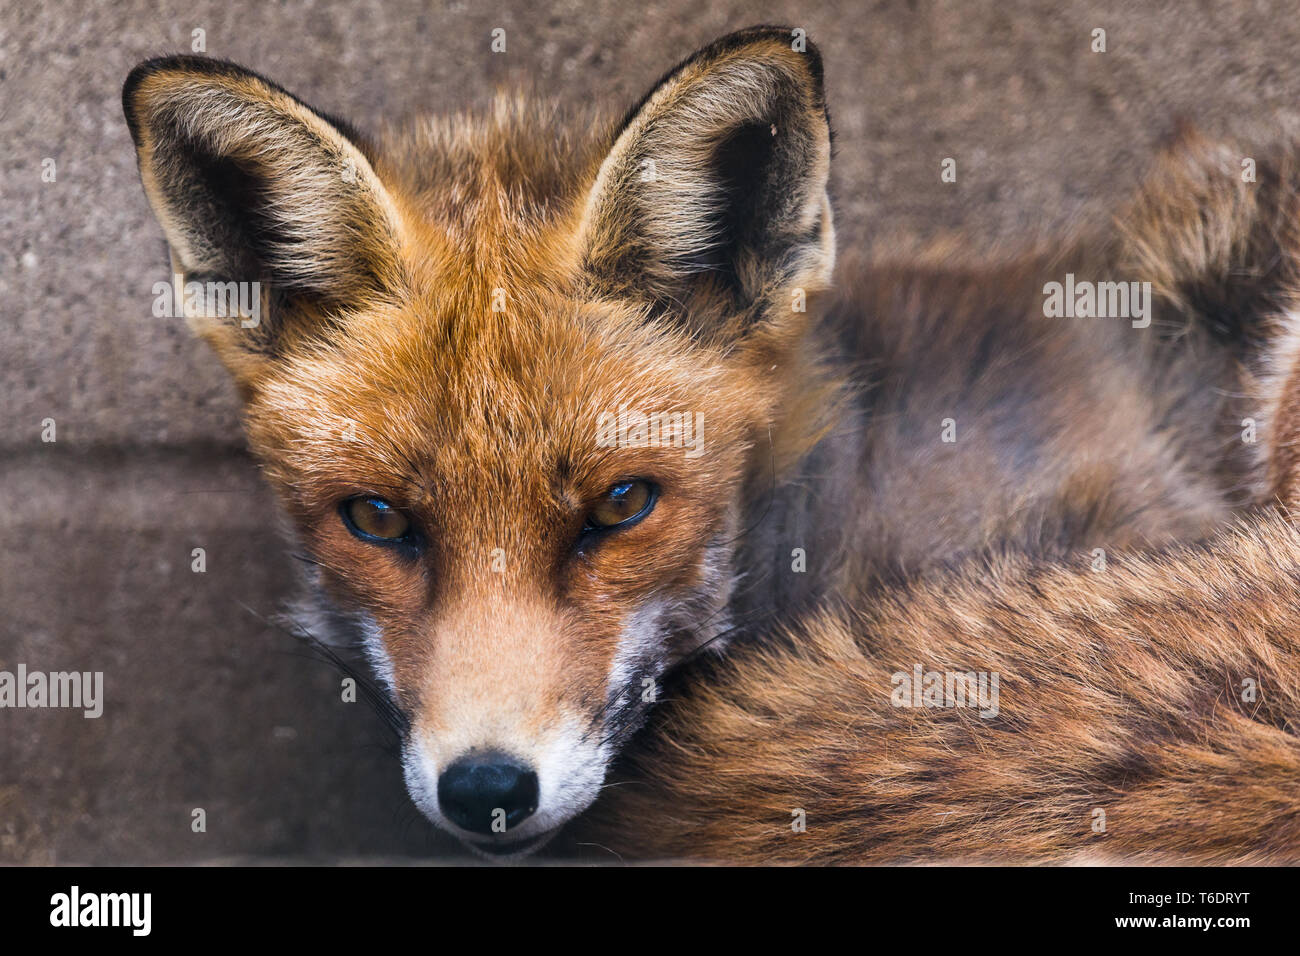 A Common Fox (Chordata) faces the camera to create a close up portrait. Stock Photo